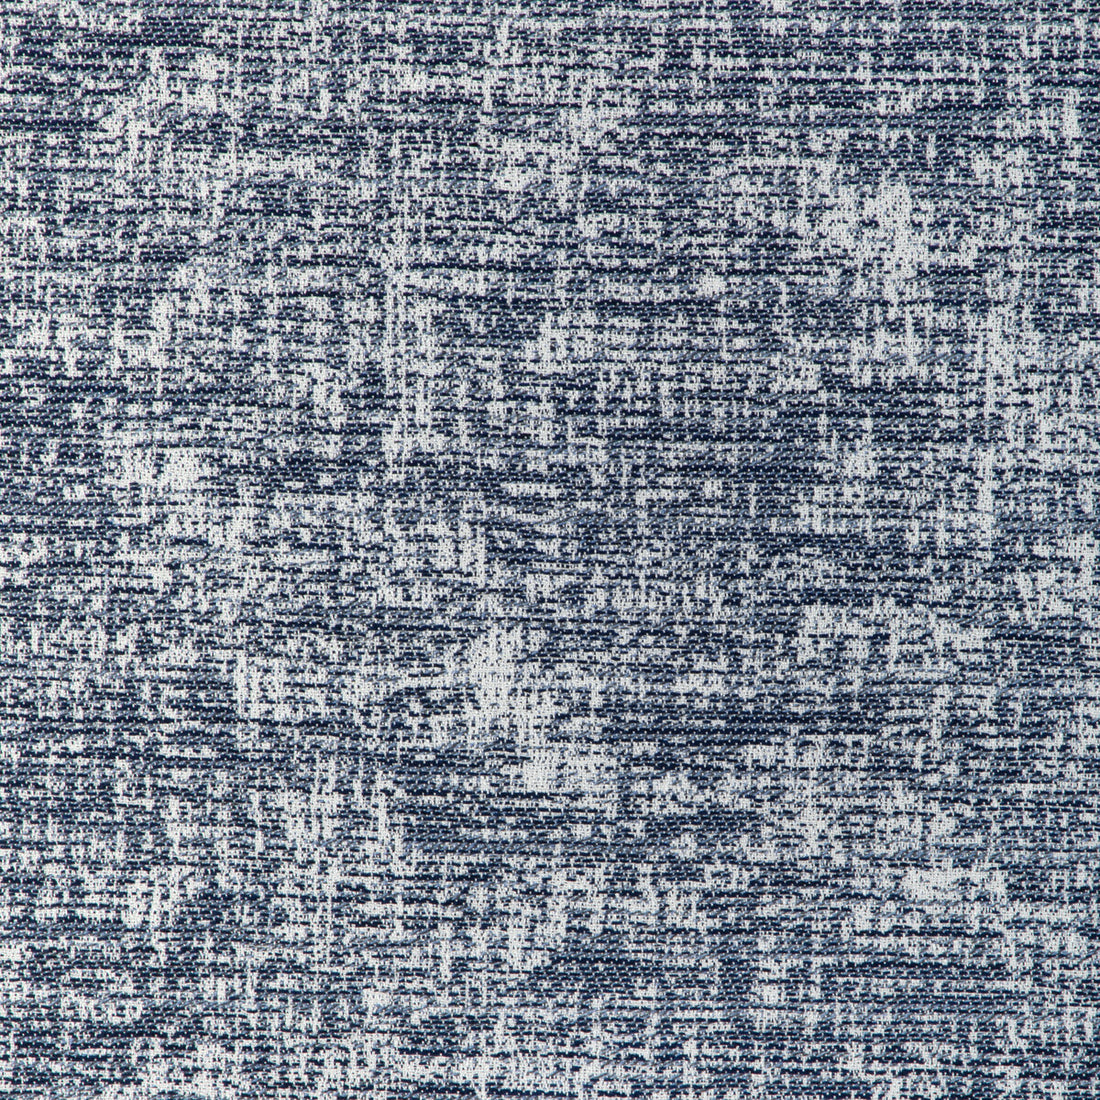 Seadrift fabric in marine color - pattern 36919.5.0 - by Kravet Couture in the Riviera collection